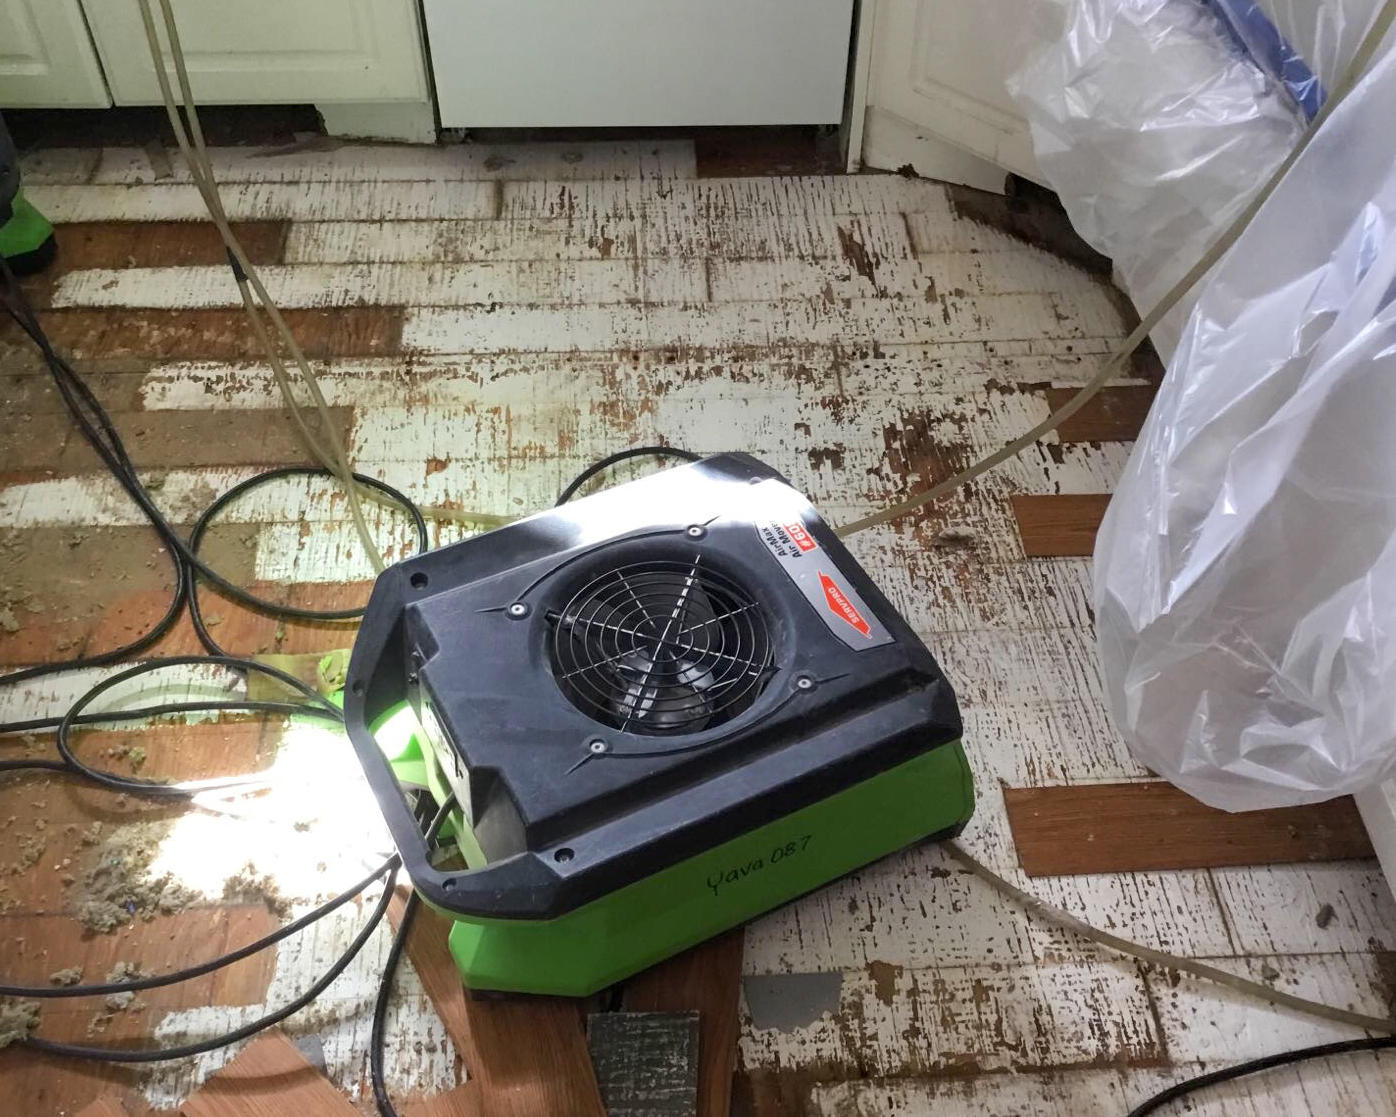 24 hours after a water loss, primary damage may become more extensive and the likelihood of secondary damage may increase. Call SERVPRO of Northwest Phoenix/Anthem 24/7, 365 for emergency water restoration services.